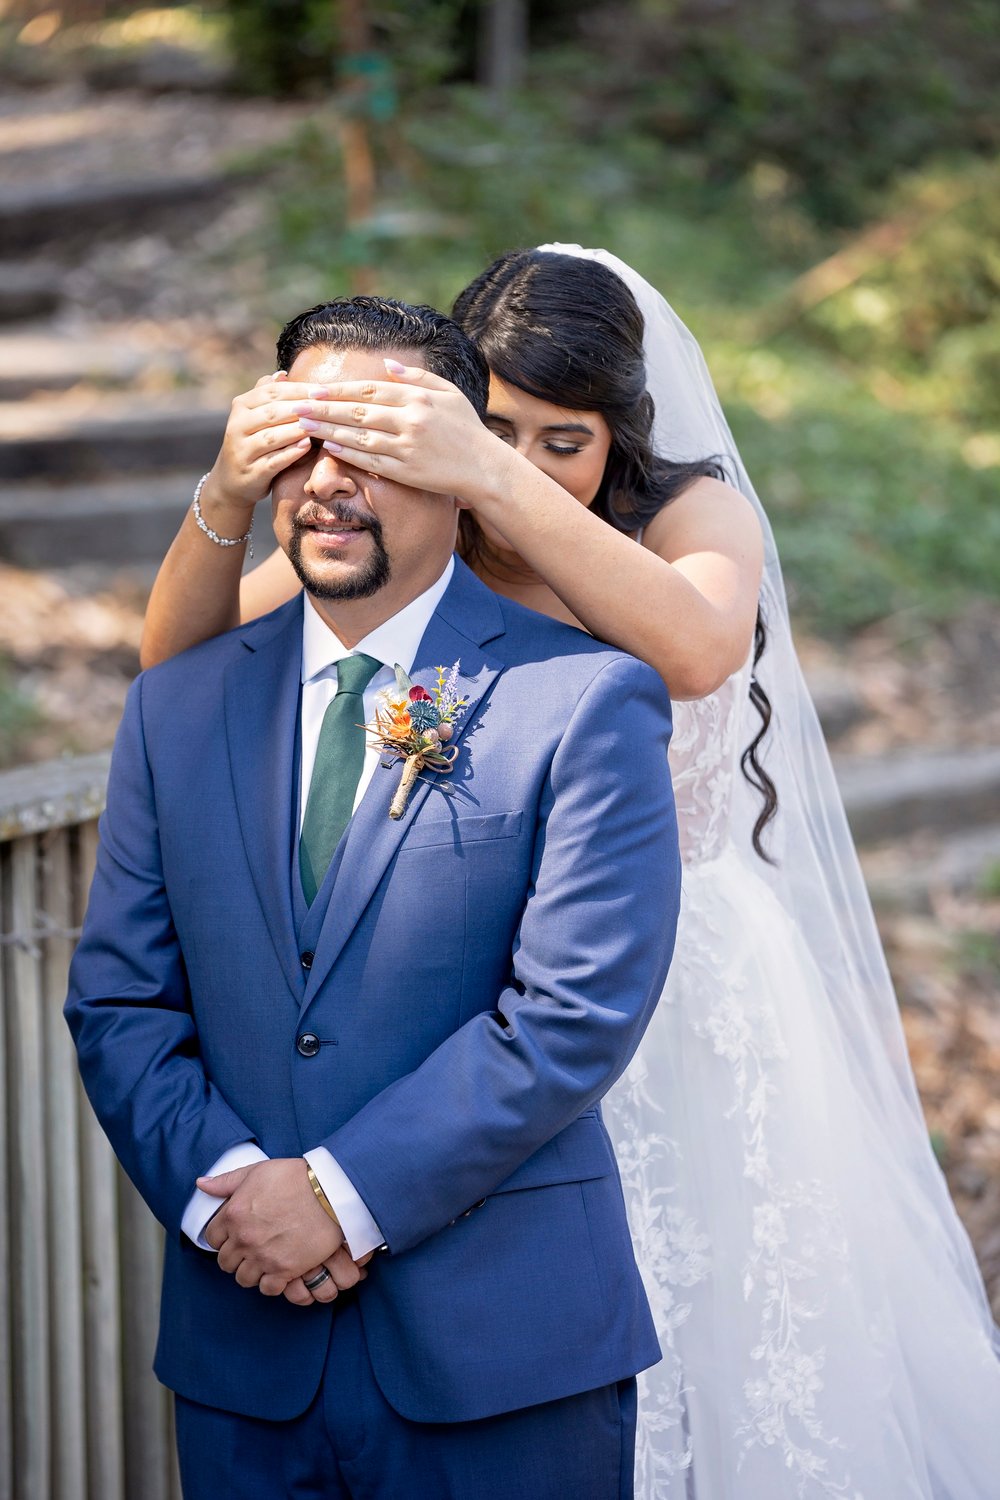 bride covering the groom's eyes for the first look